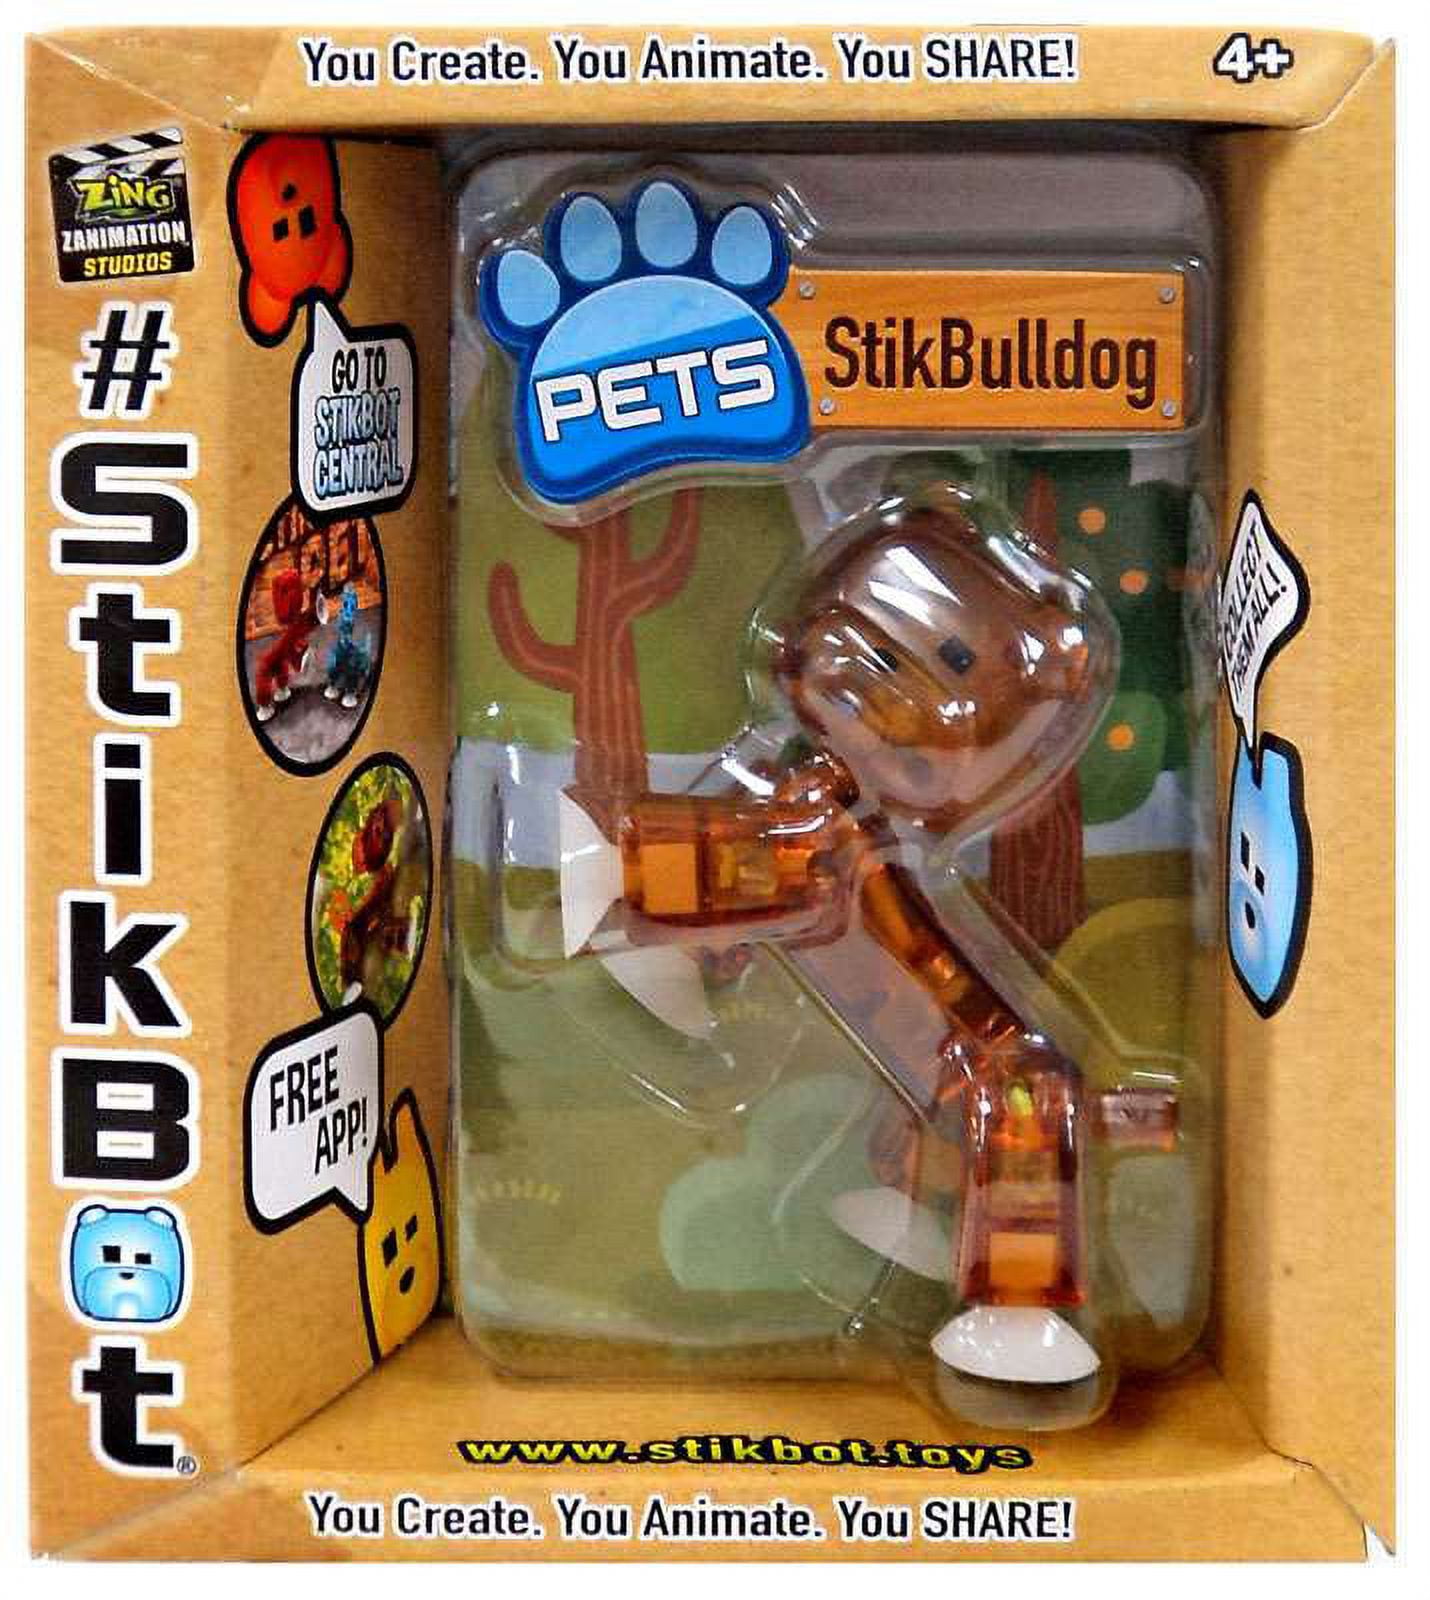 Zing Stikbot Pets 5 Pack, Set of 5 Stikbot Collectable Action Figures,  Includes 1 Bulldog, 1 Monkey, 1 Cat and 2 Dogs, Create Stop Motion Animation